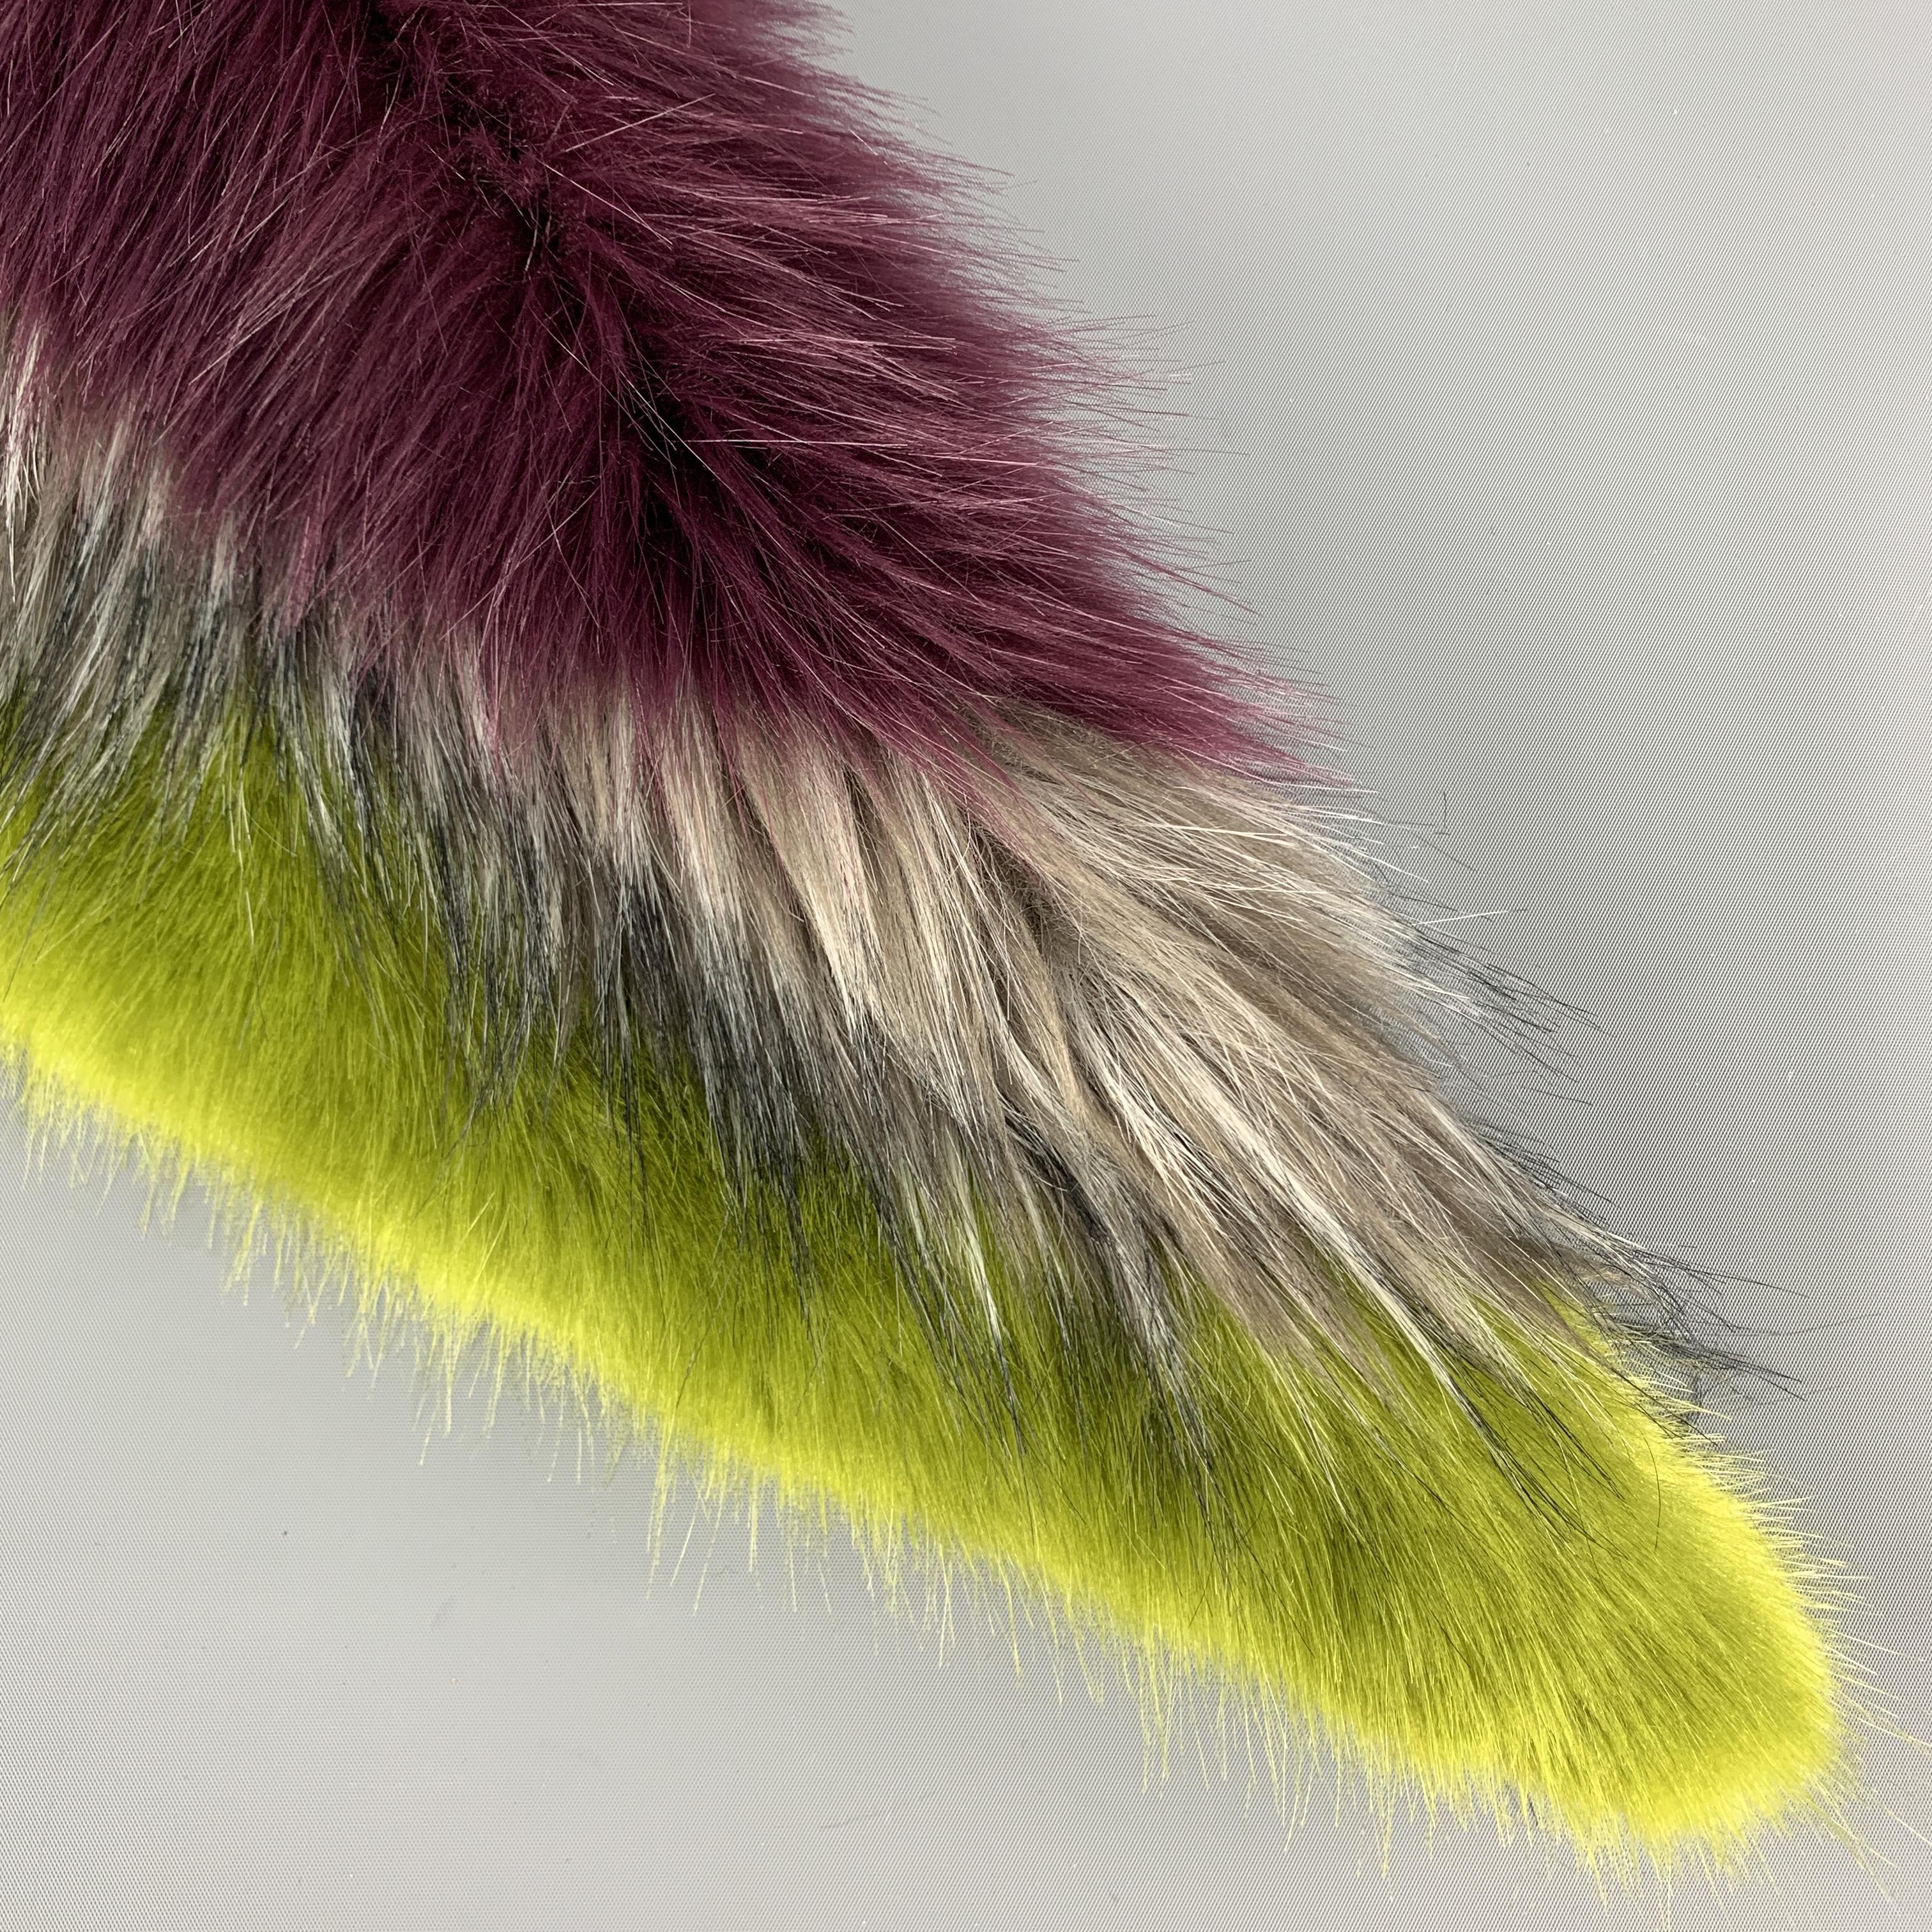 DRIES VAN NOTEN Ginny1401 Faux Fur Collar comes in green and purple modacrylic / acetate material. 

New With Tags.

Measurements:

Length: 44 in. 
Width: 8.5 in. 